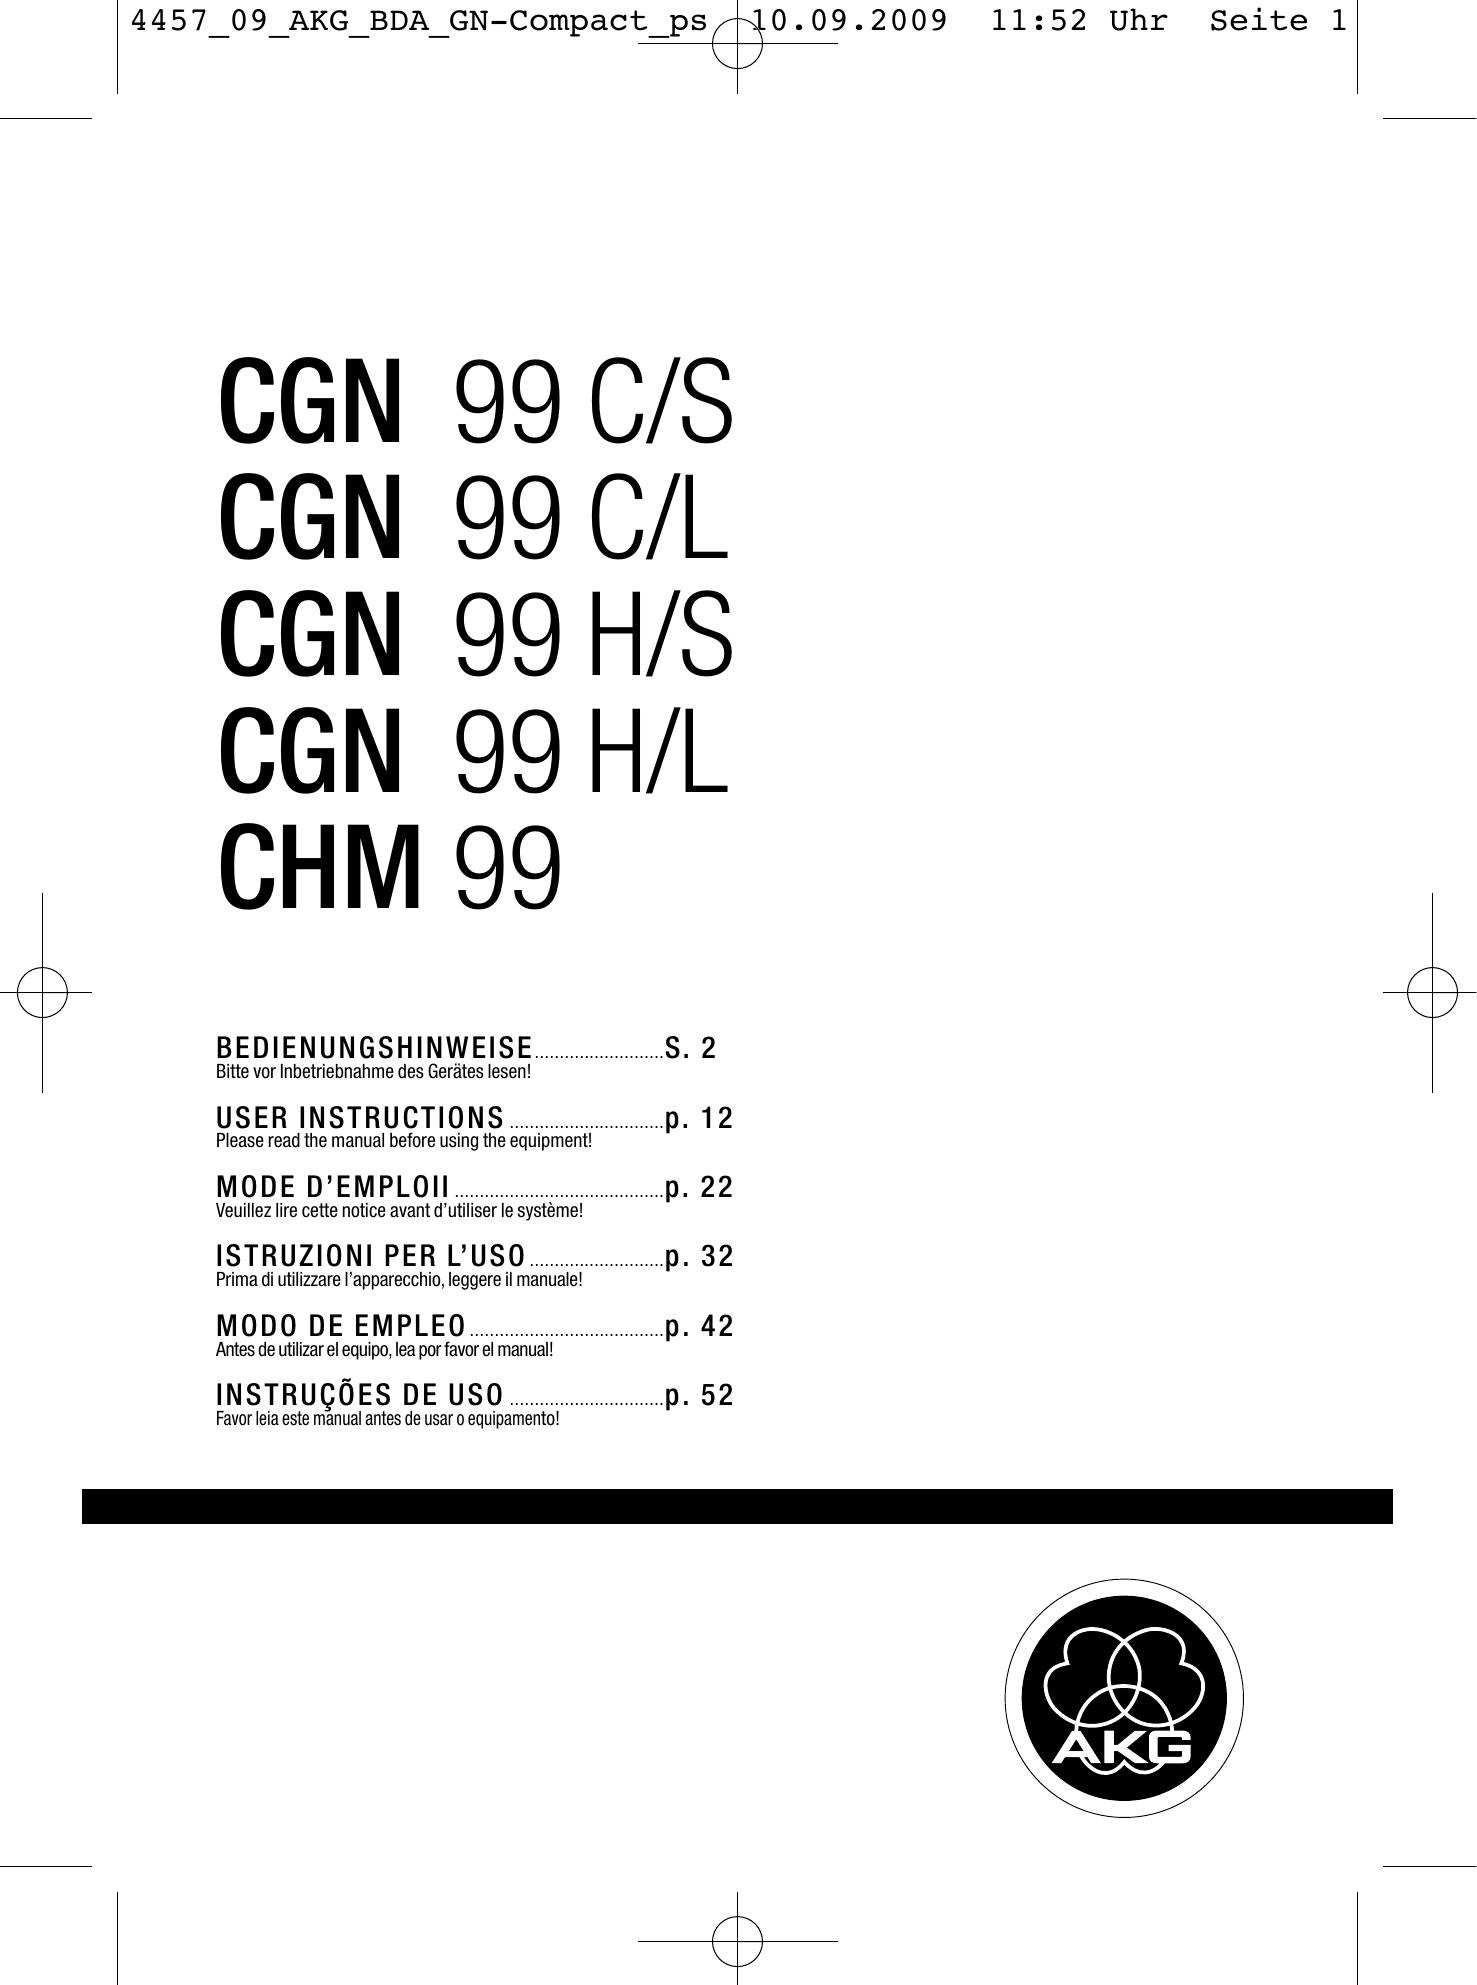 AKG Acoustics CGN 99 C/L Microphone User Manual (Page 1)